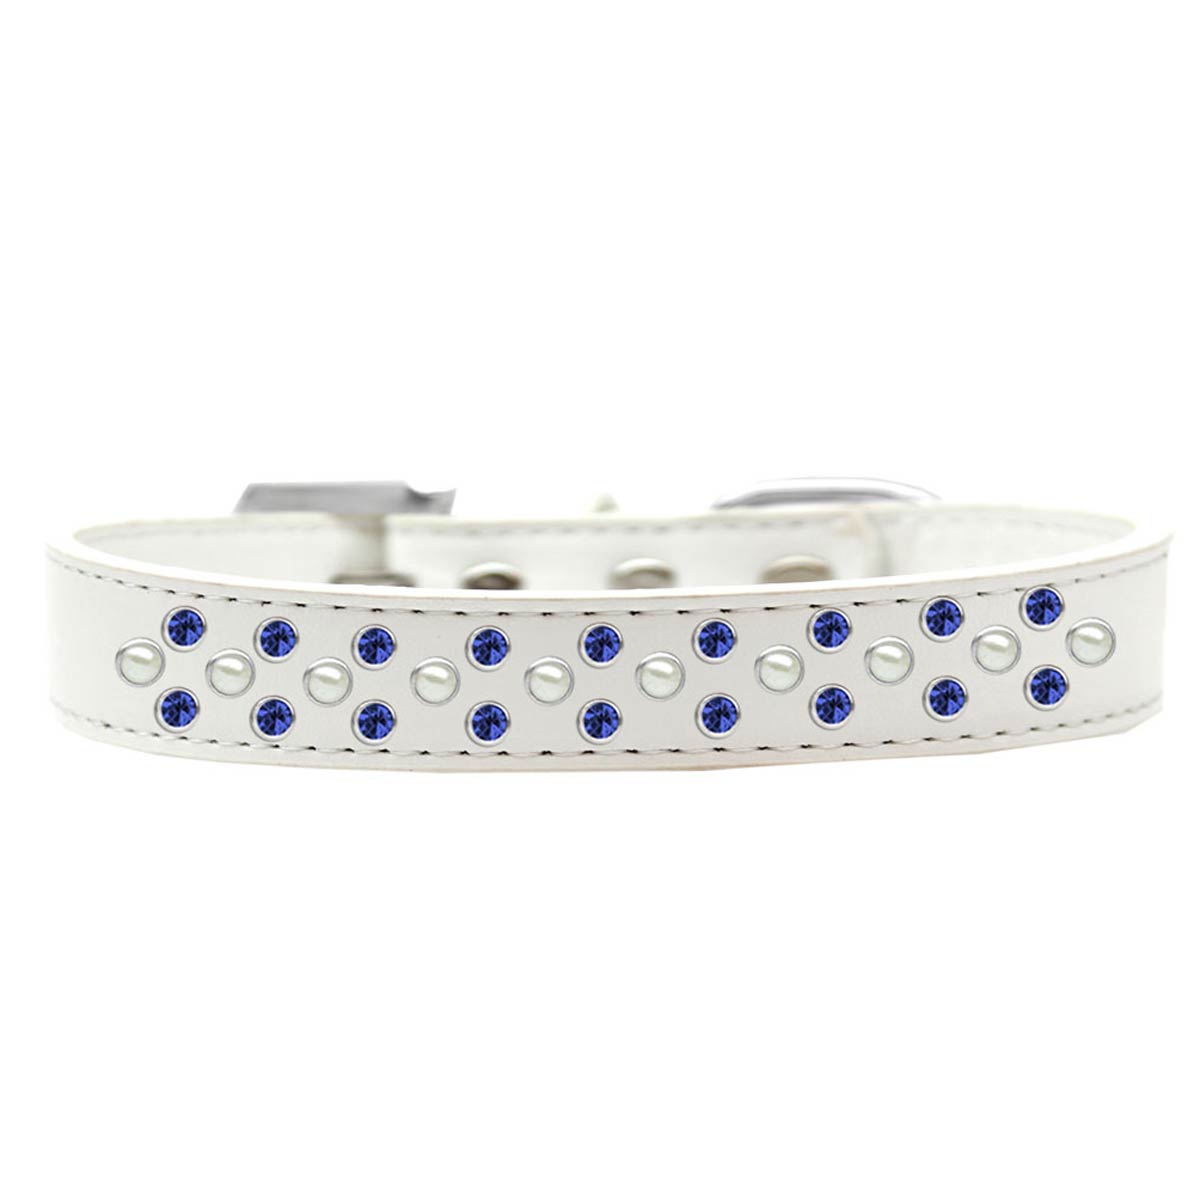 Sprinkles Pearl and Blue Crystals Dog Collar - White